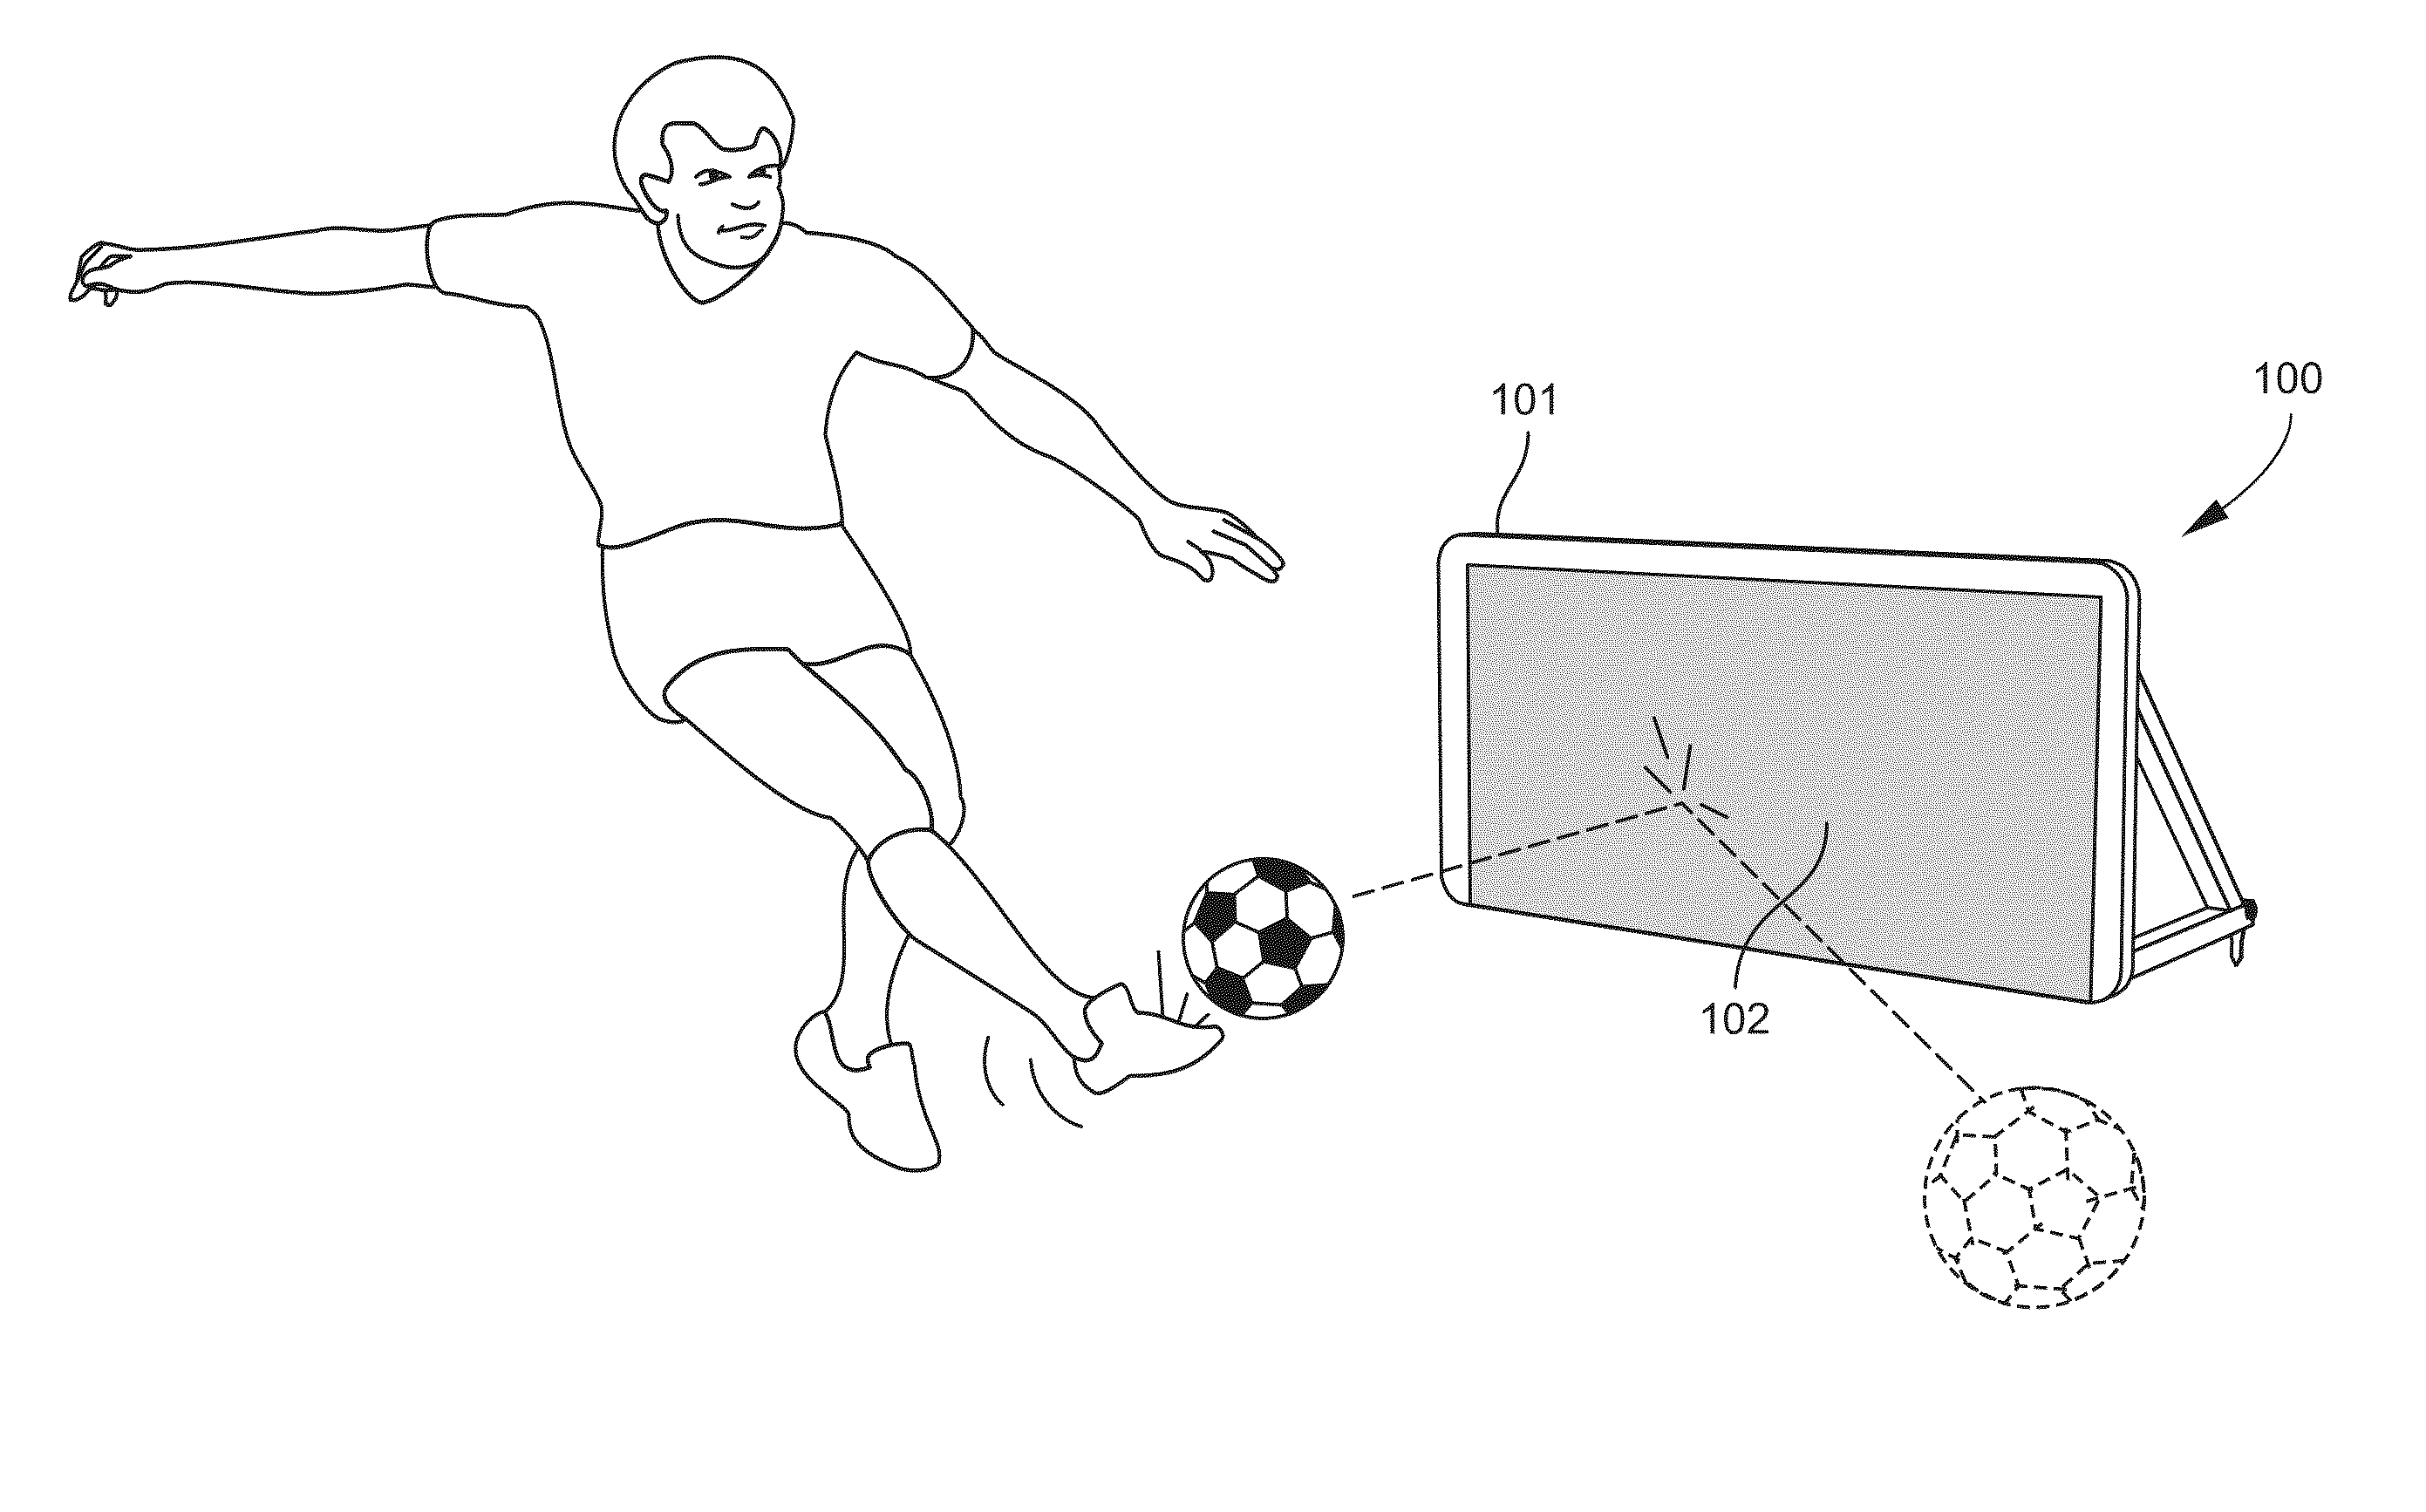 Soccer Training Device, Method of Use and System